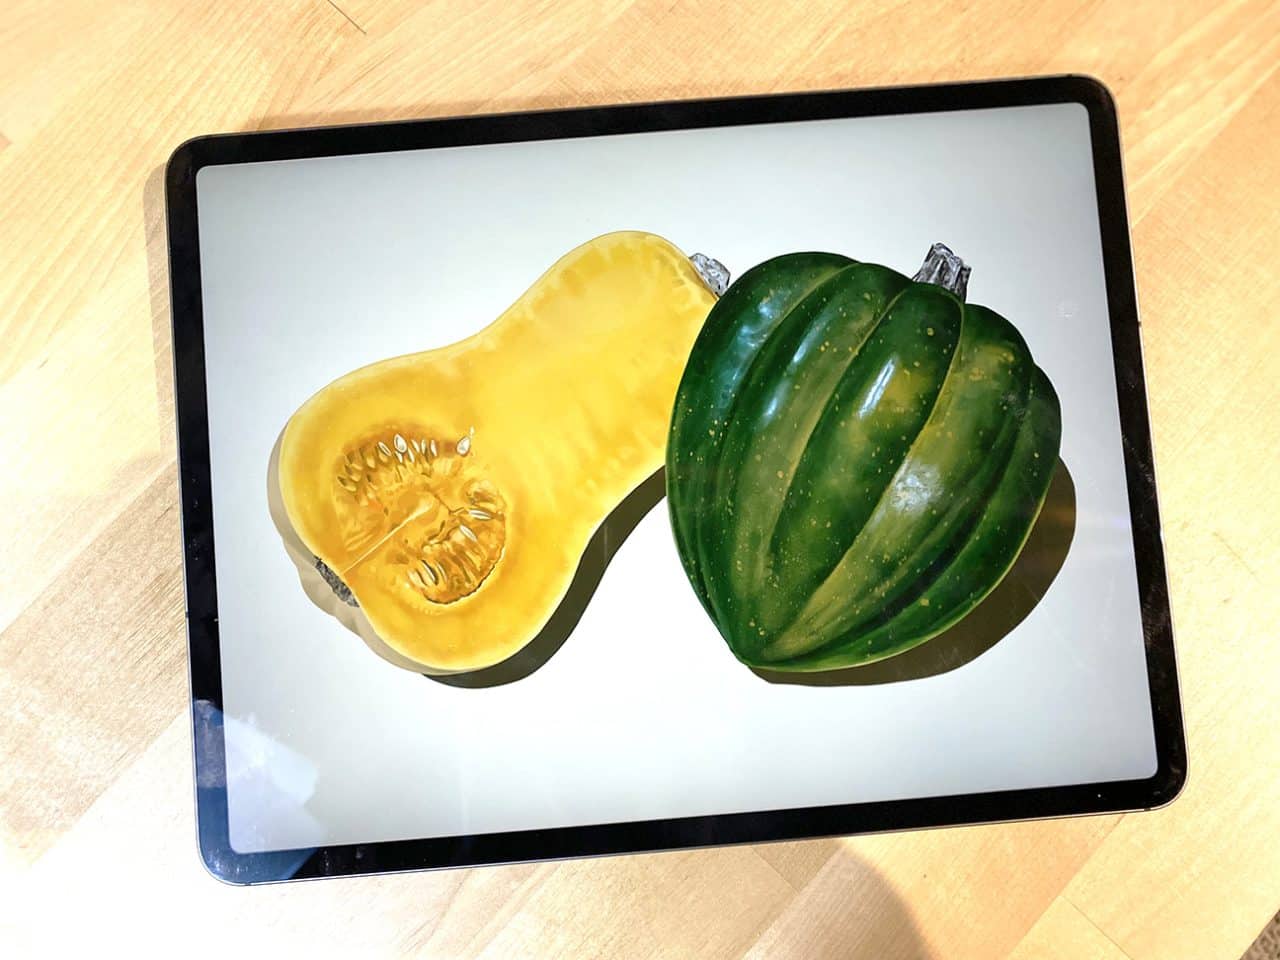 Learn the process of creating a digital squash drawing with Procreate on iPad Pro.